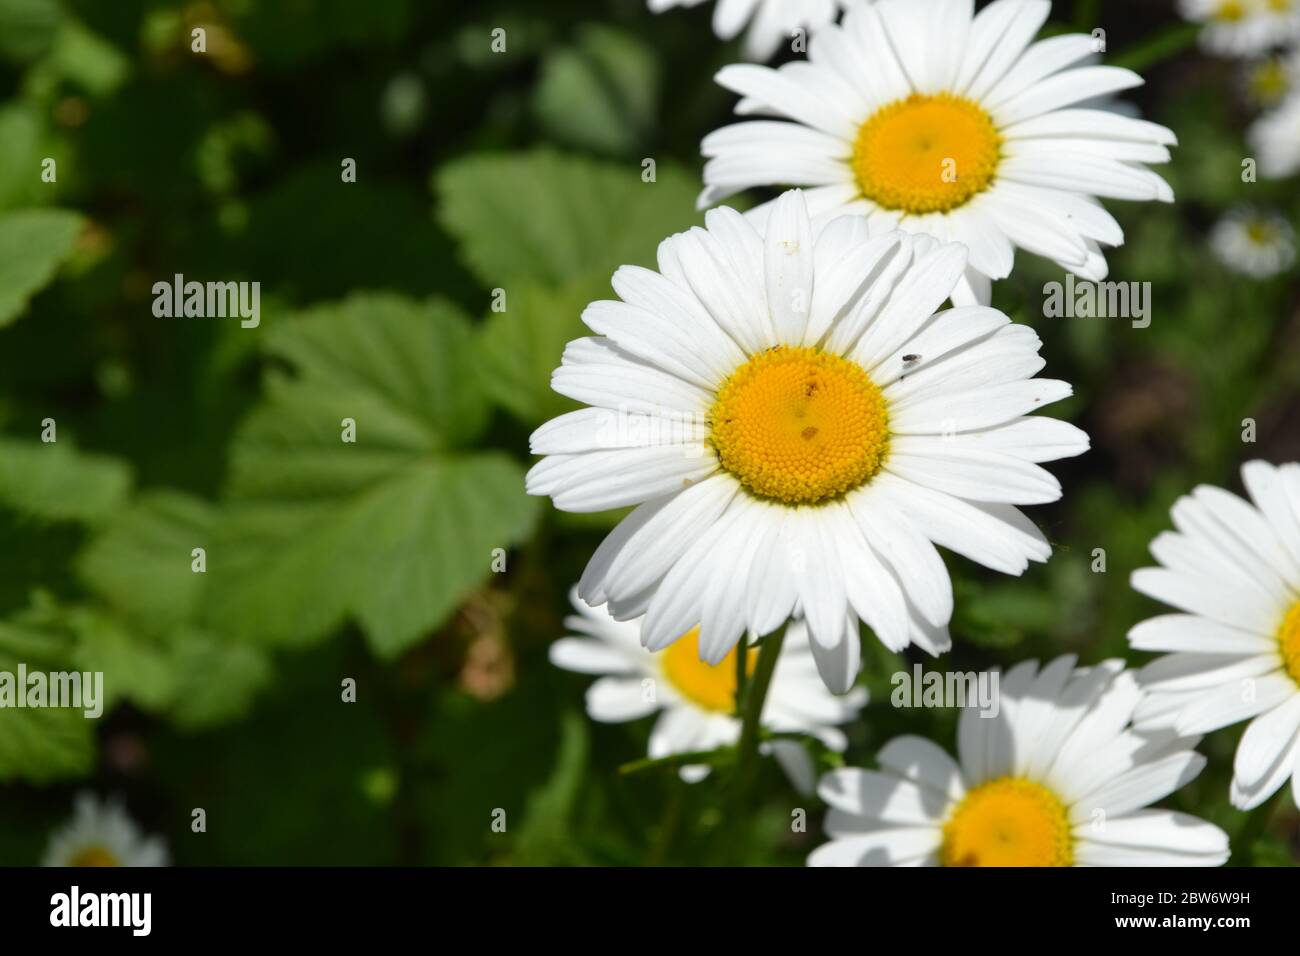 White flowers. Gardening. Daisy flower, chamomile. Matricaria Perennial flowering plant of the Asteraceae family. Beautiful, delicate inflorescences Stock Photo